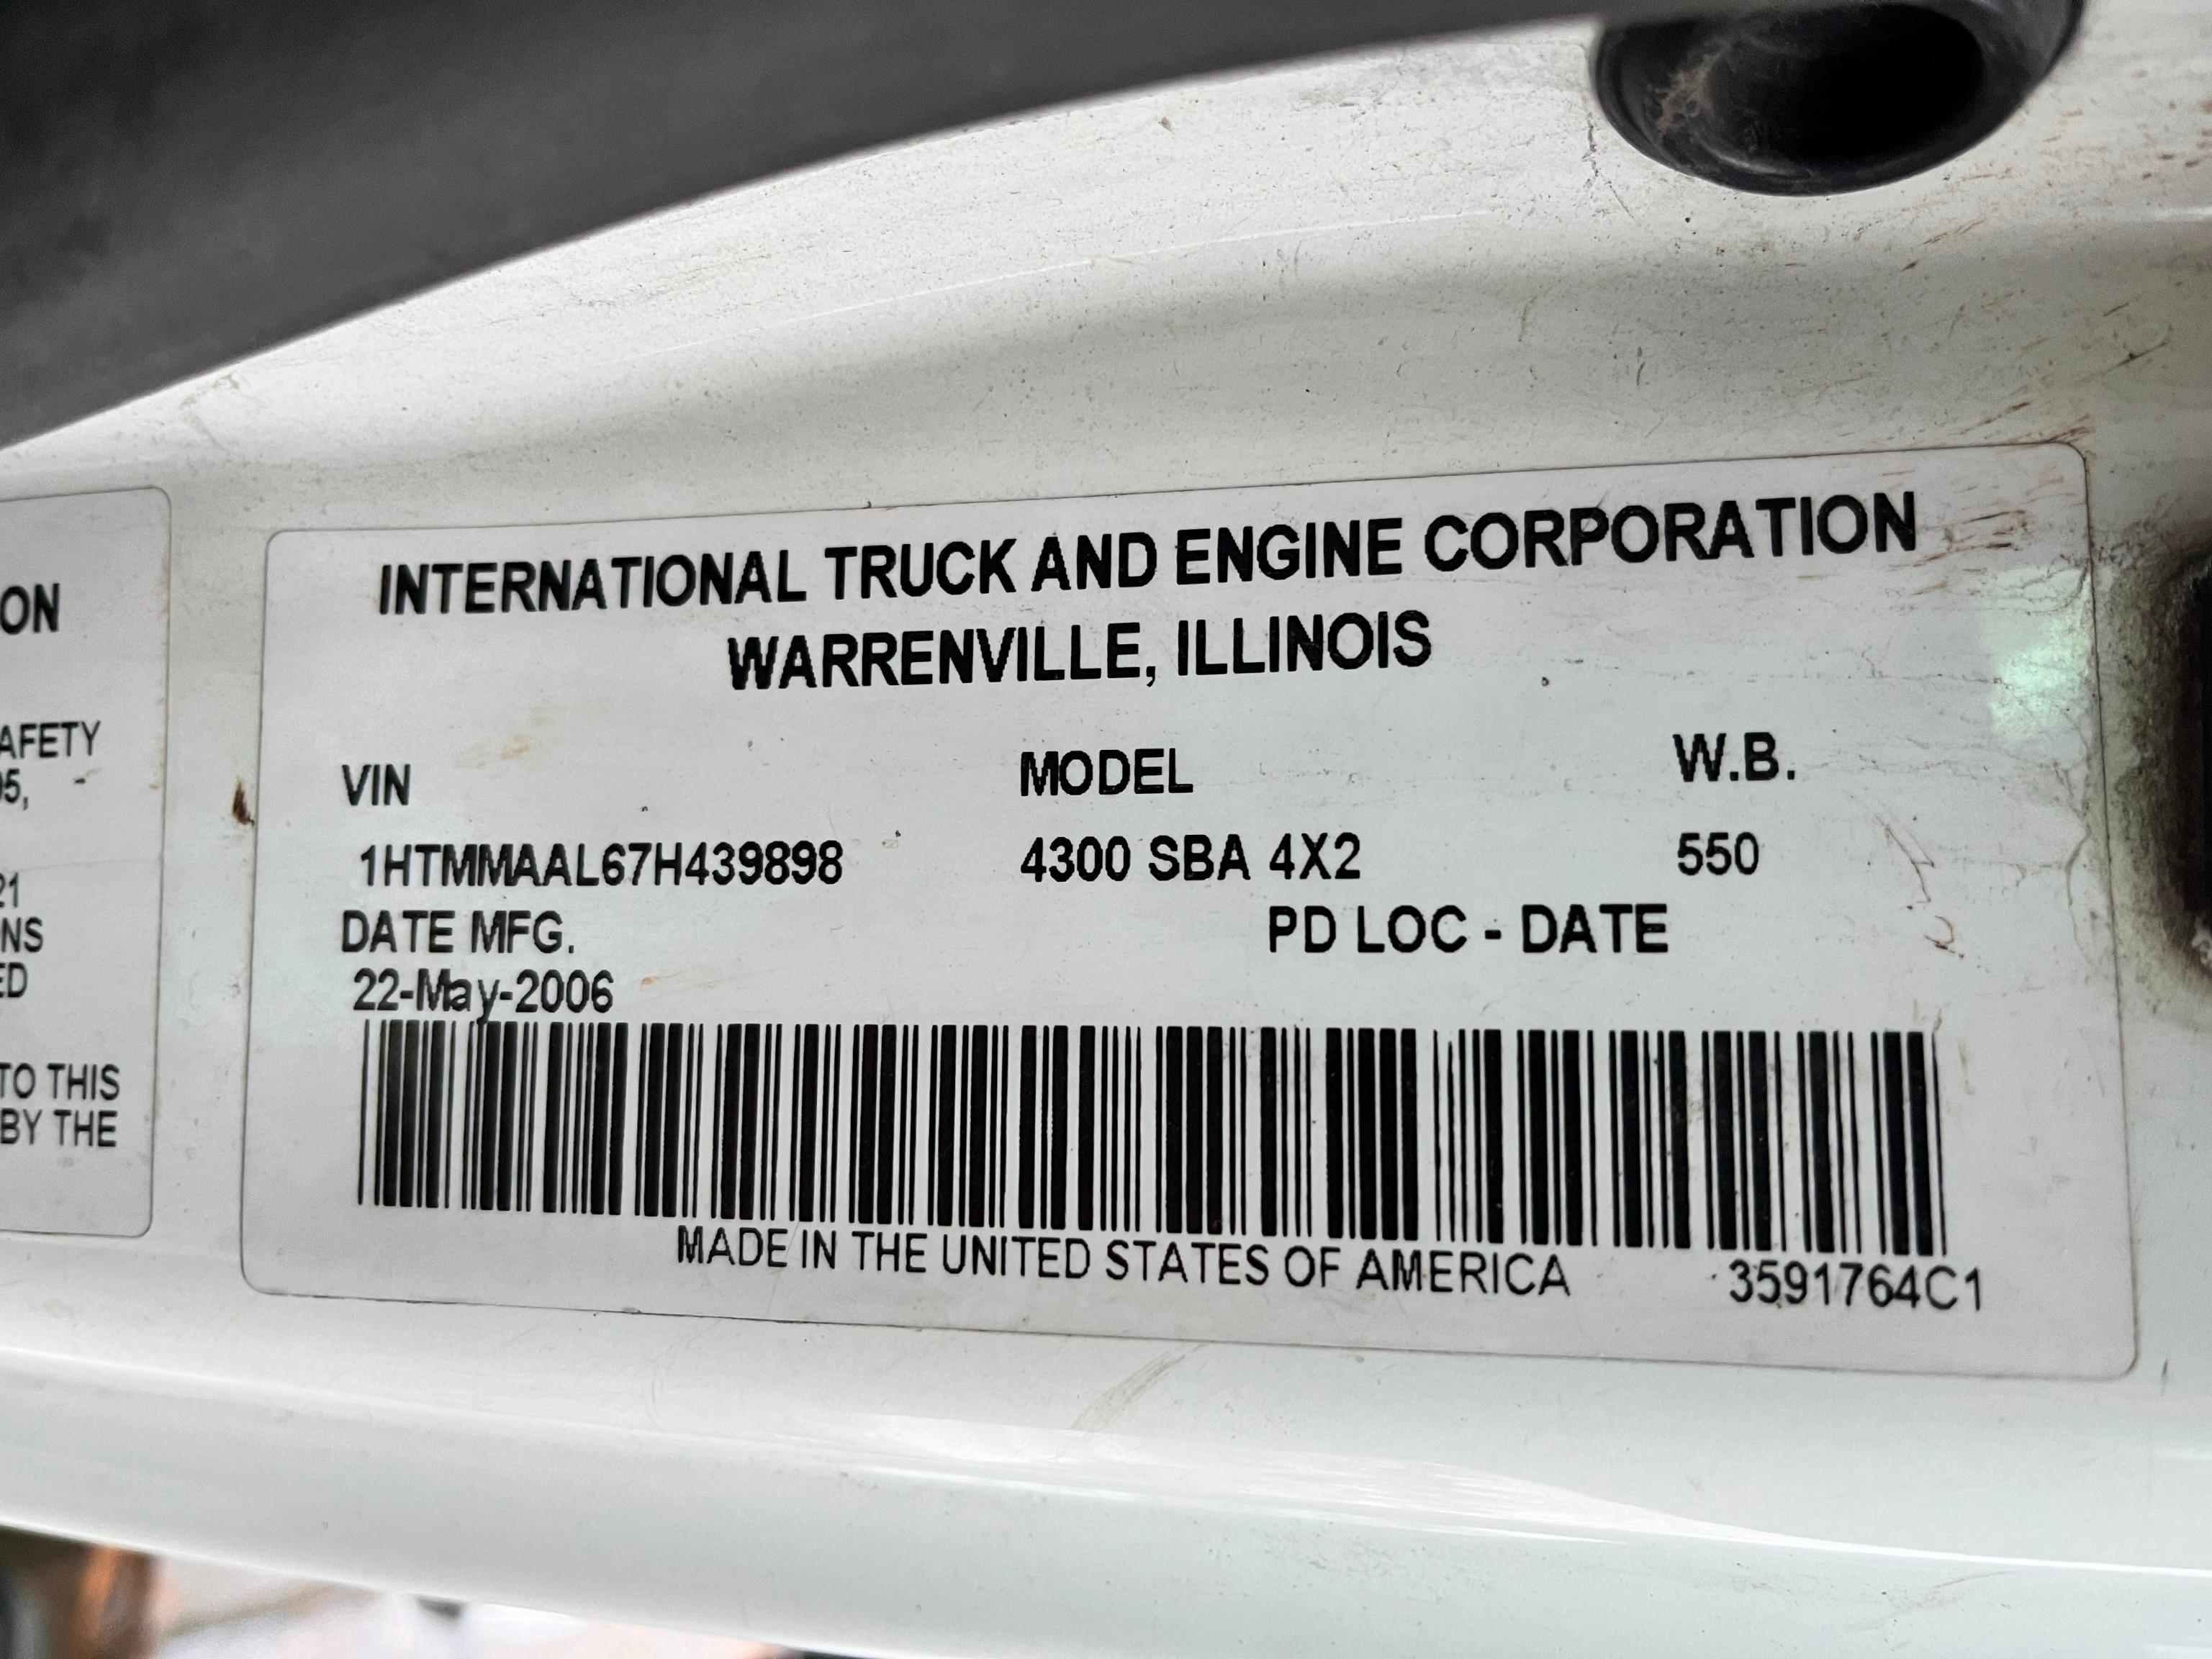 INTERNATIONAL 4300 ROLLBACK TRUCK VN:1HTMMAAL67H439898 powered by DT466 diesel engine, equipped with